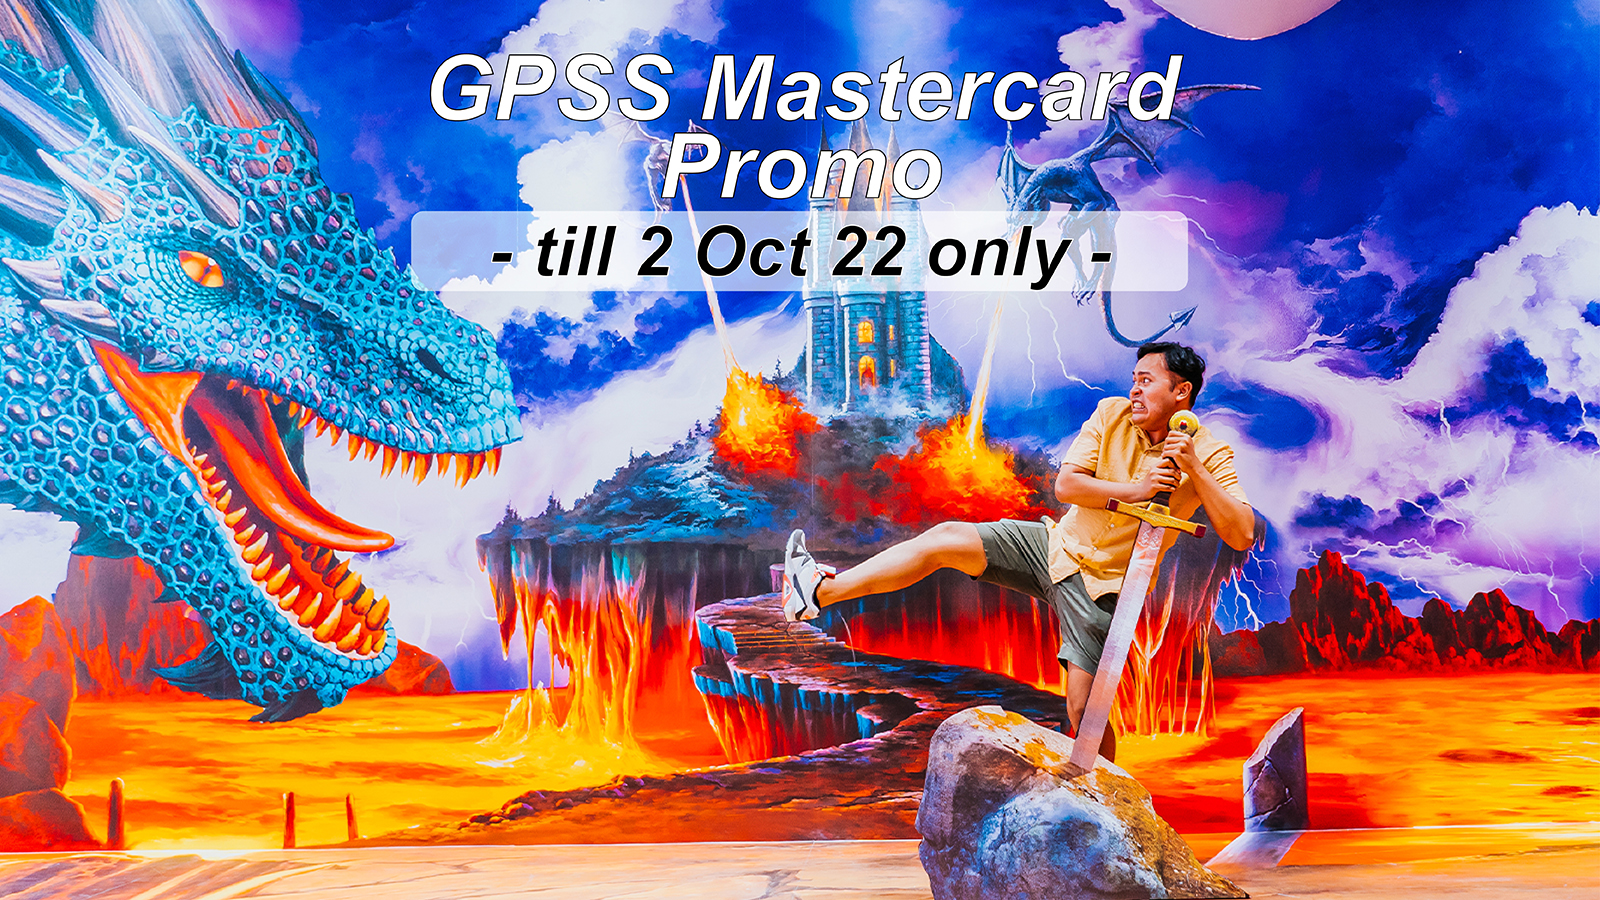 GPSS Mastercard Exclusive: Buy 2 Adult Tickets and Get 1 FREE Child Ticket